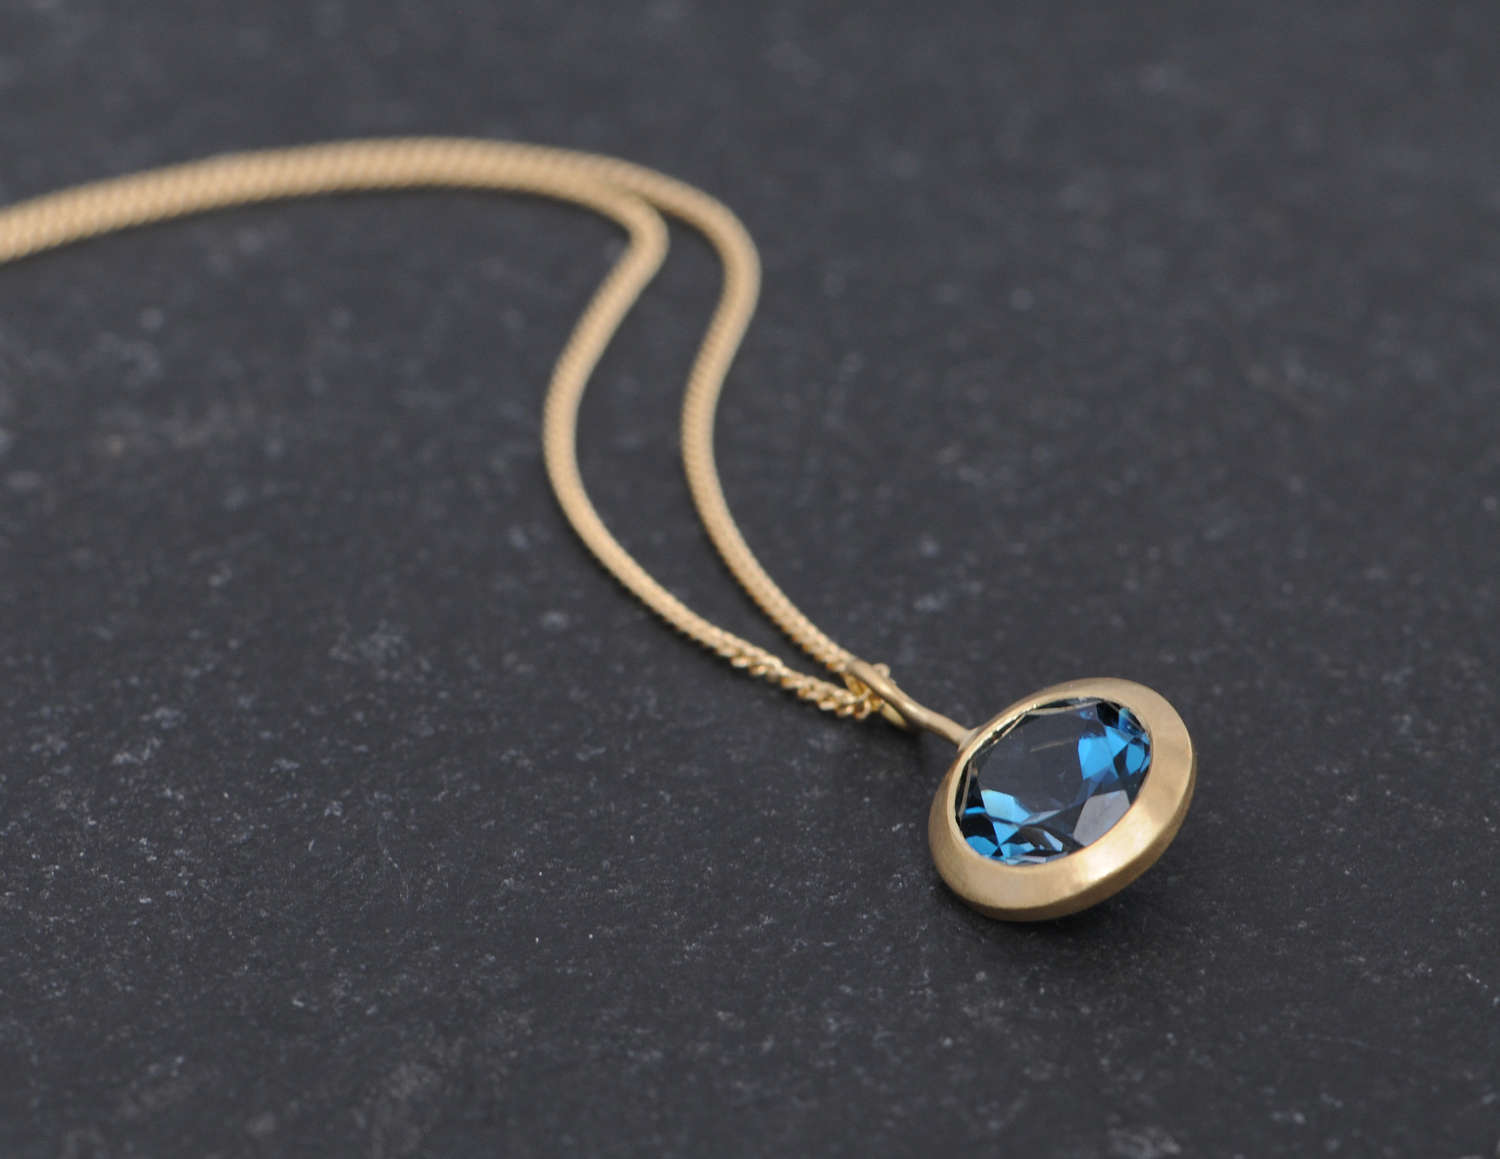 Bright London blue topaz pendant, set in recycled gold on a gold chain. This 18k yellow gold necklace is designed and handmade by William White in Cornwall